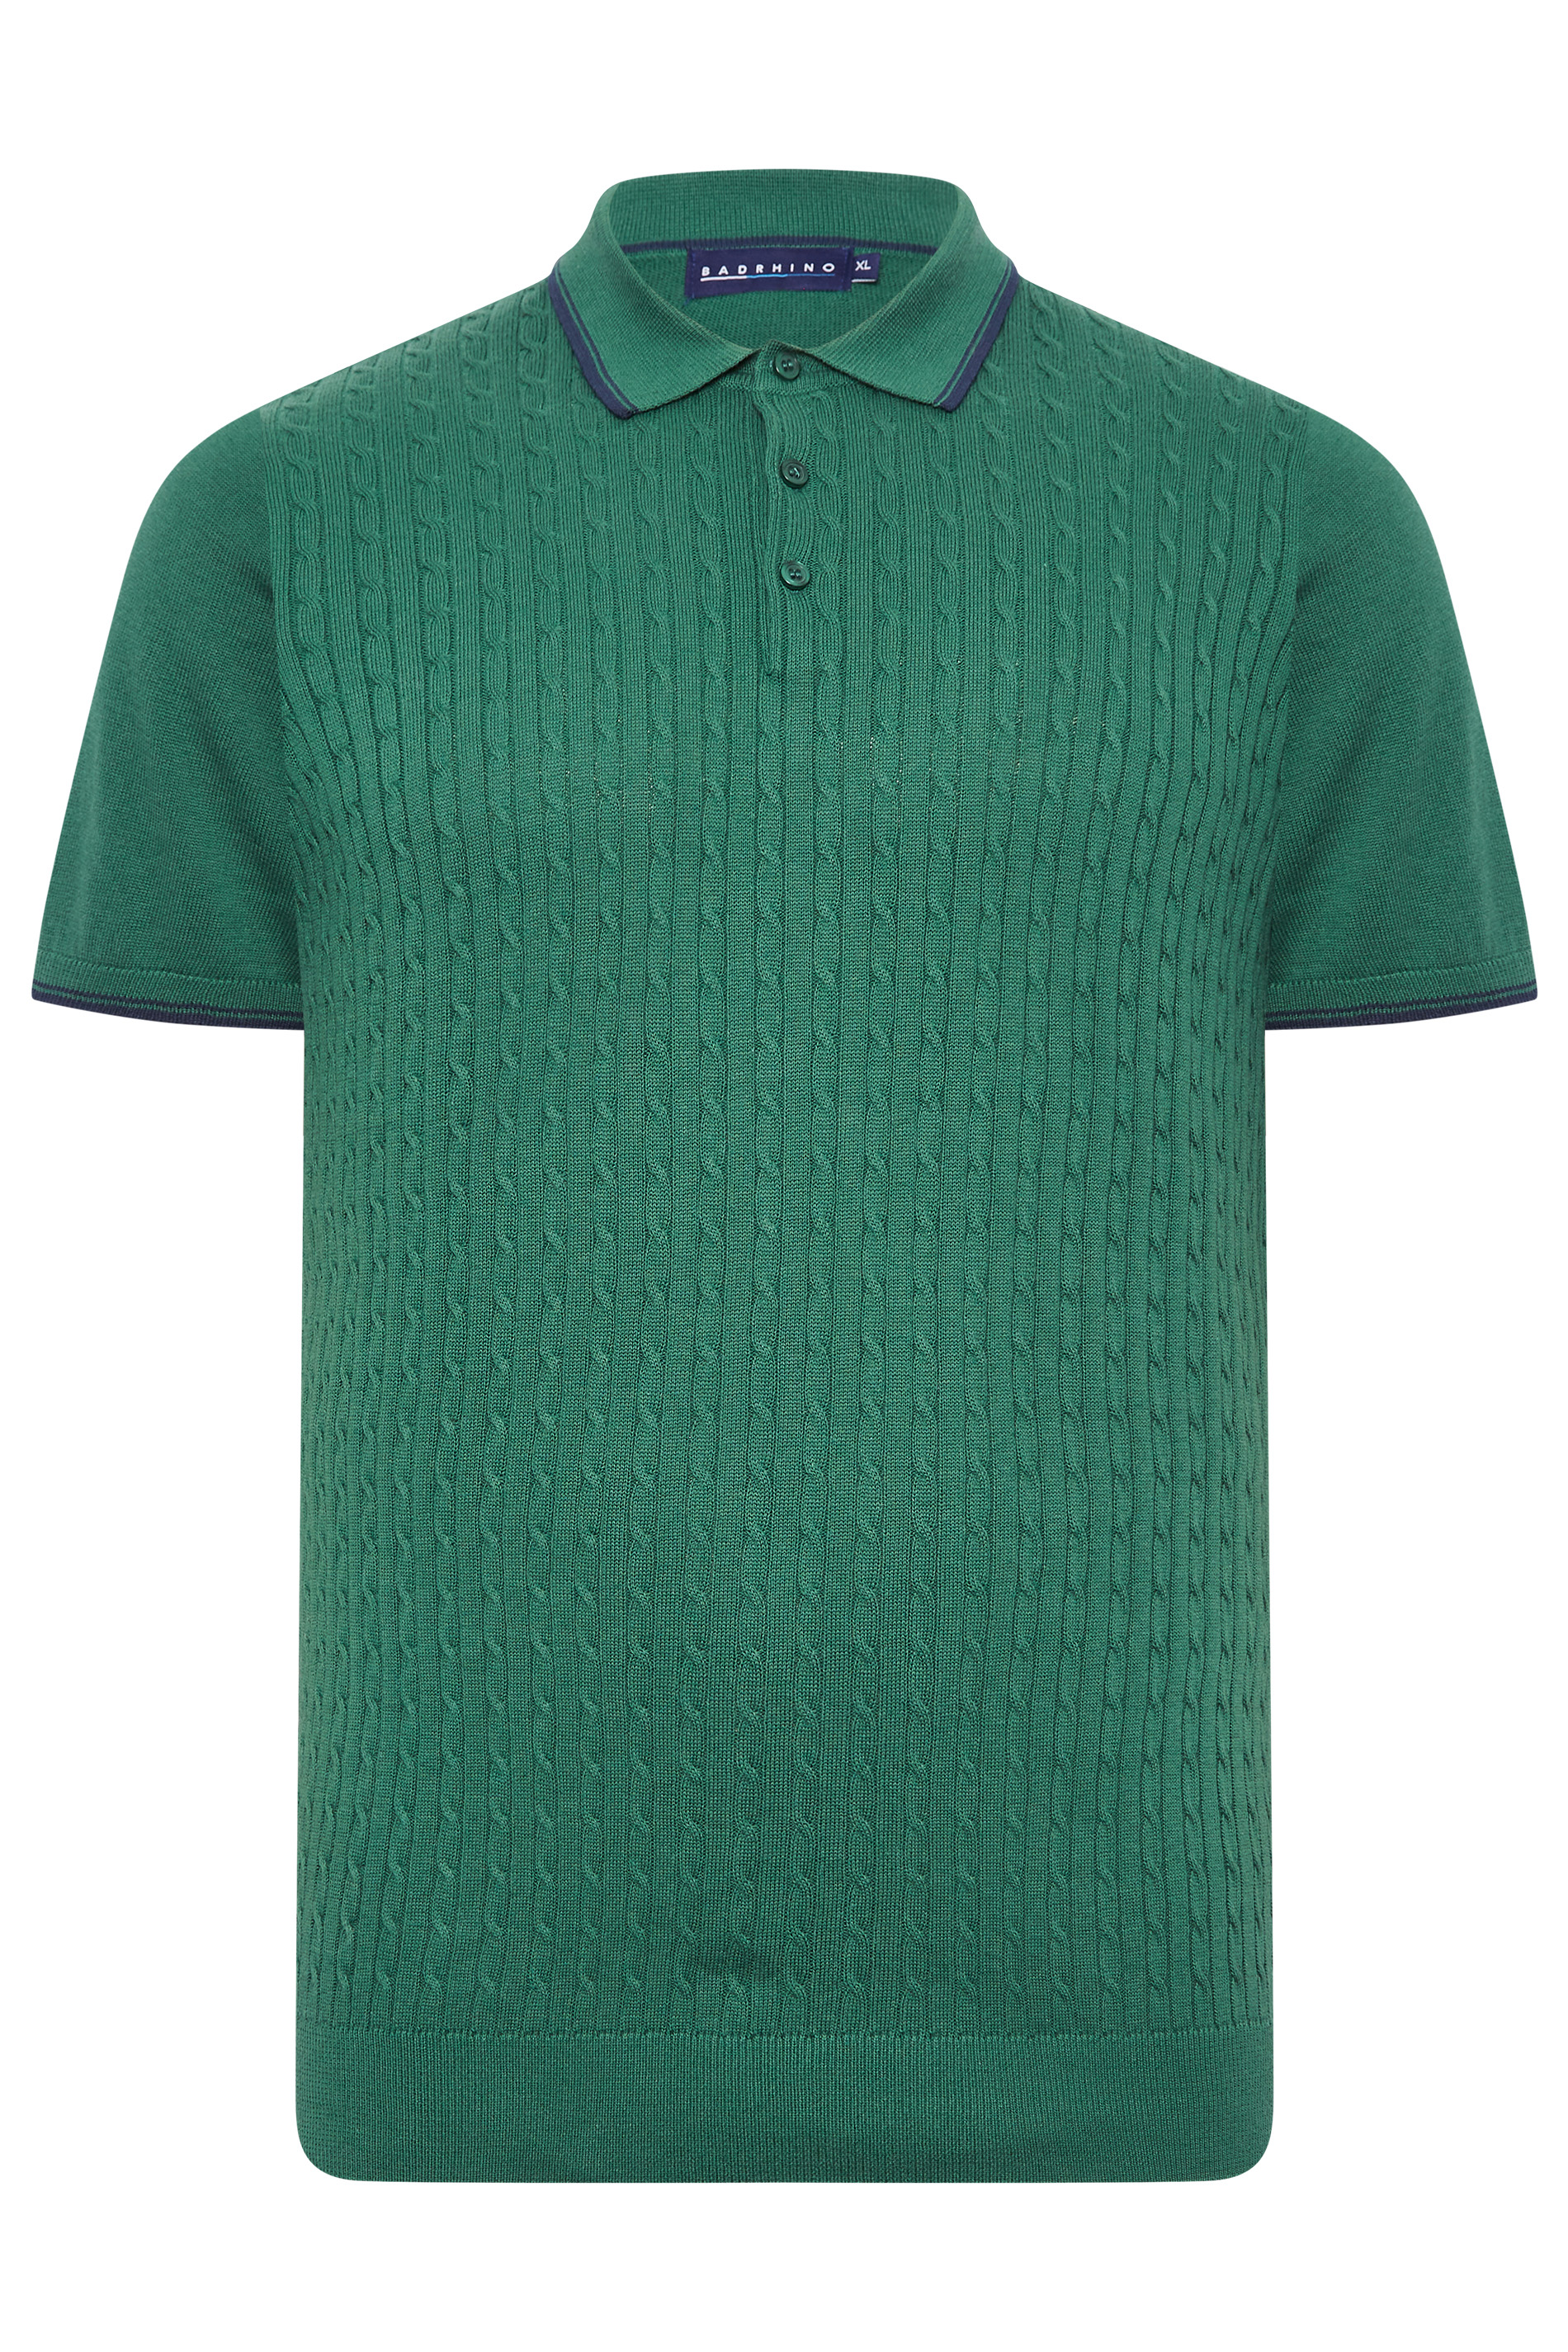 BadRhino Big & Tall Forest Green Cable Knitted Polo Shirt | BadRhino 3